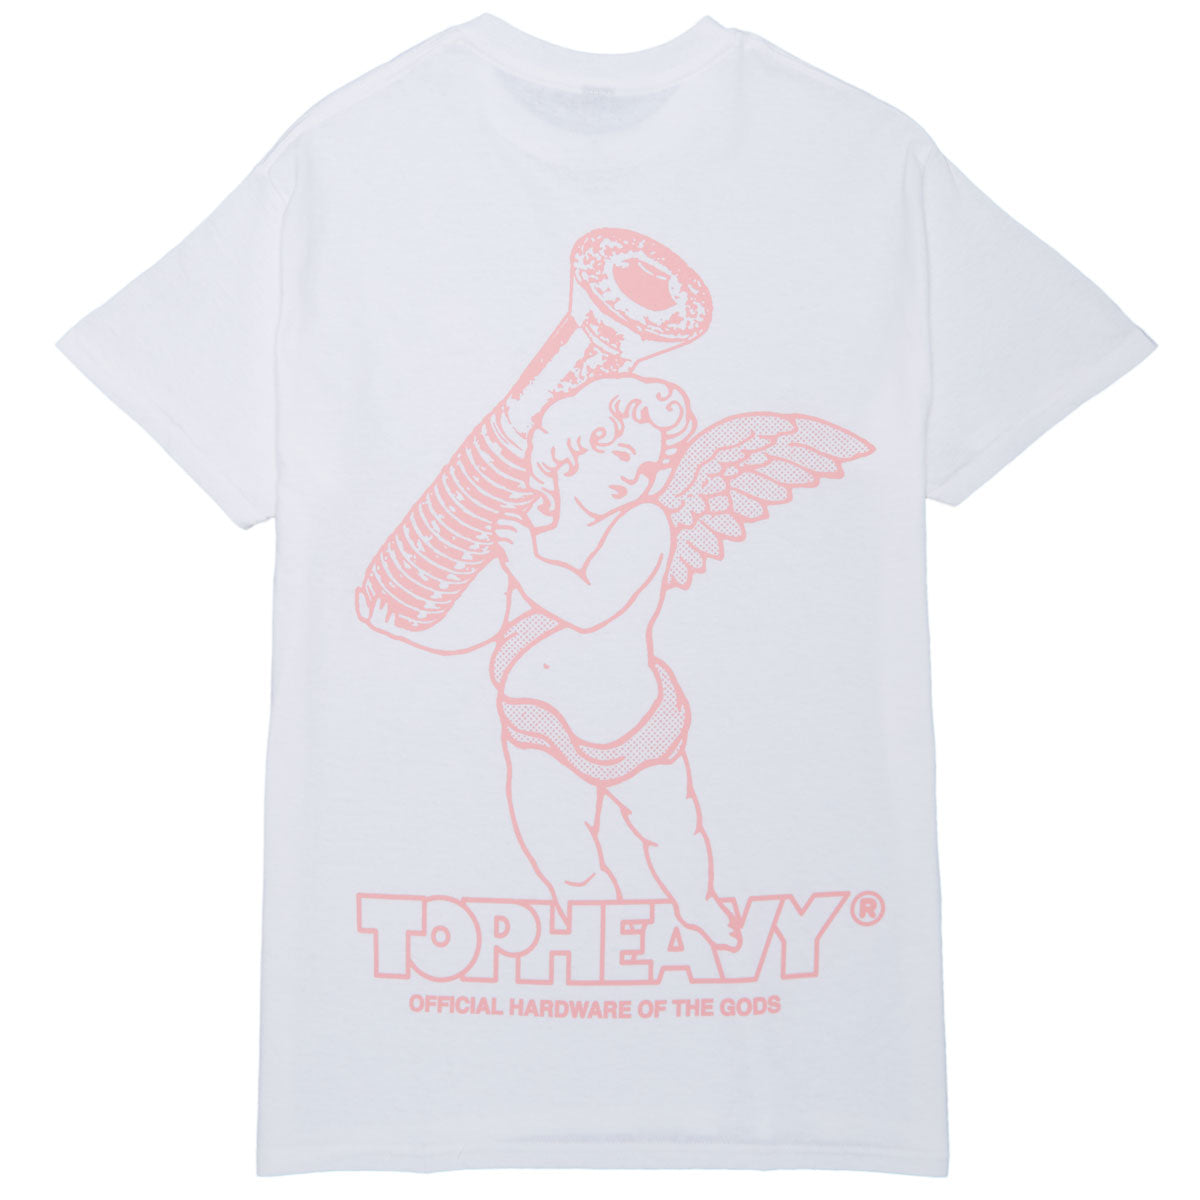 Top Heavy Hardware Of The Gods T-Shirt - White image 1